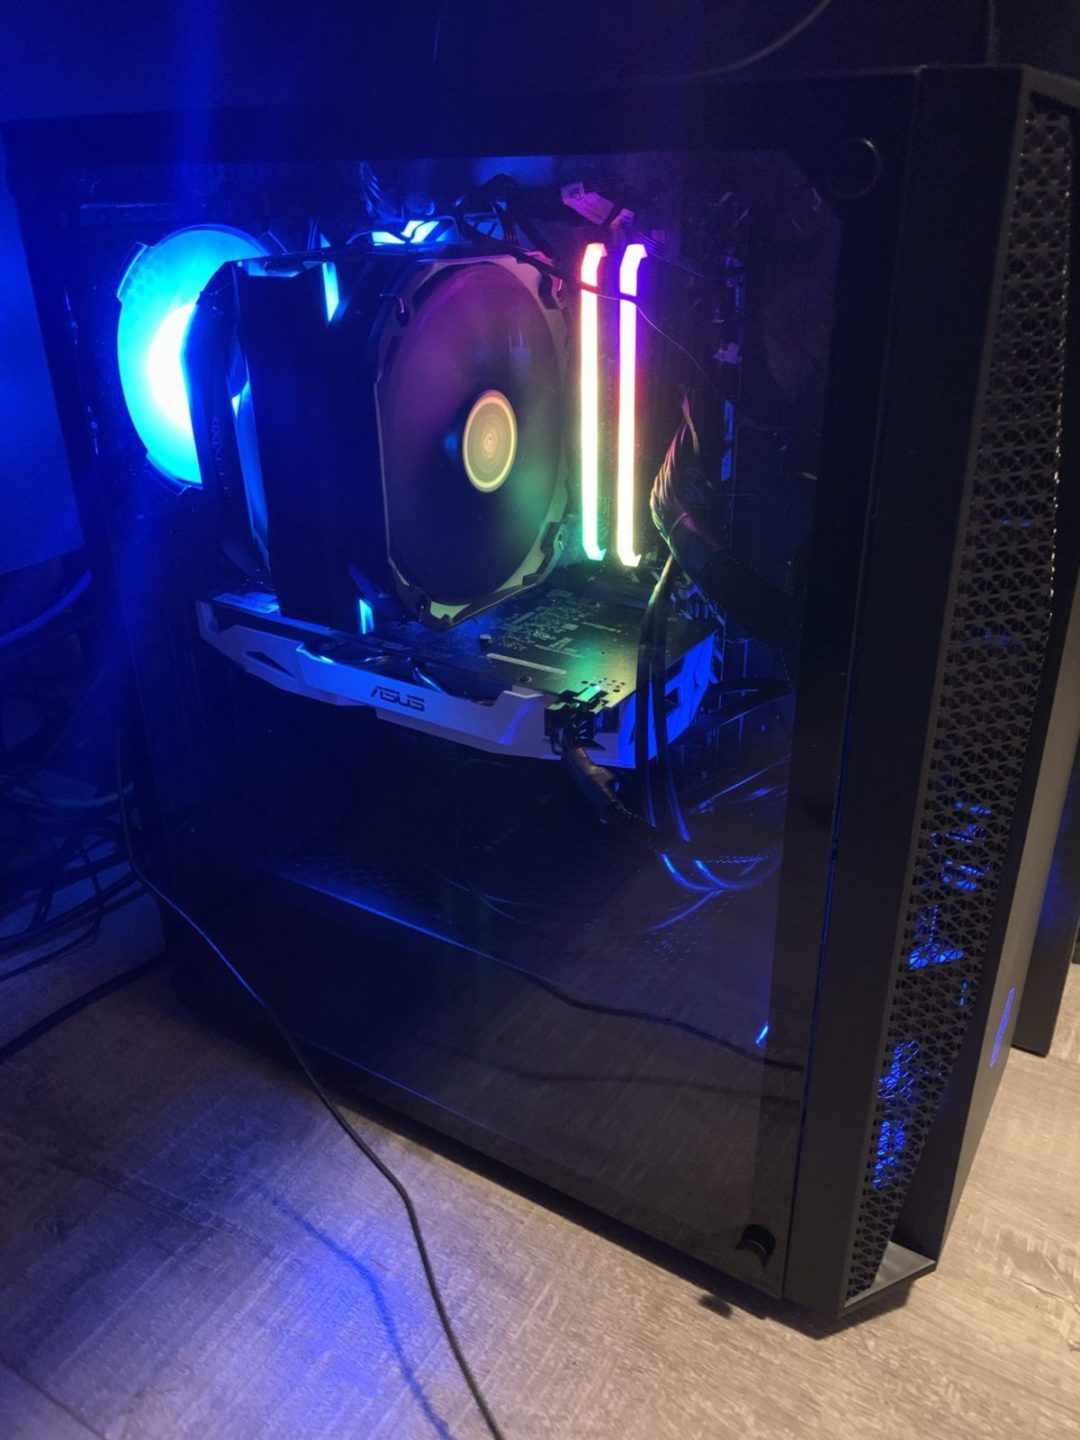 2021 PC Build with Intel i5-12600K CPU